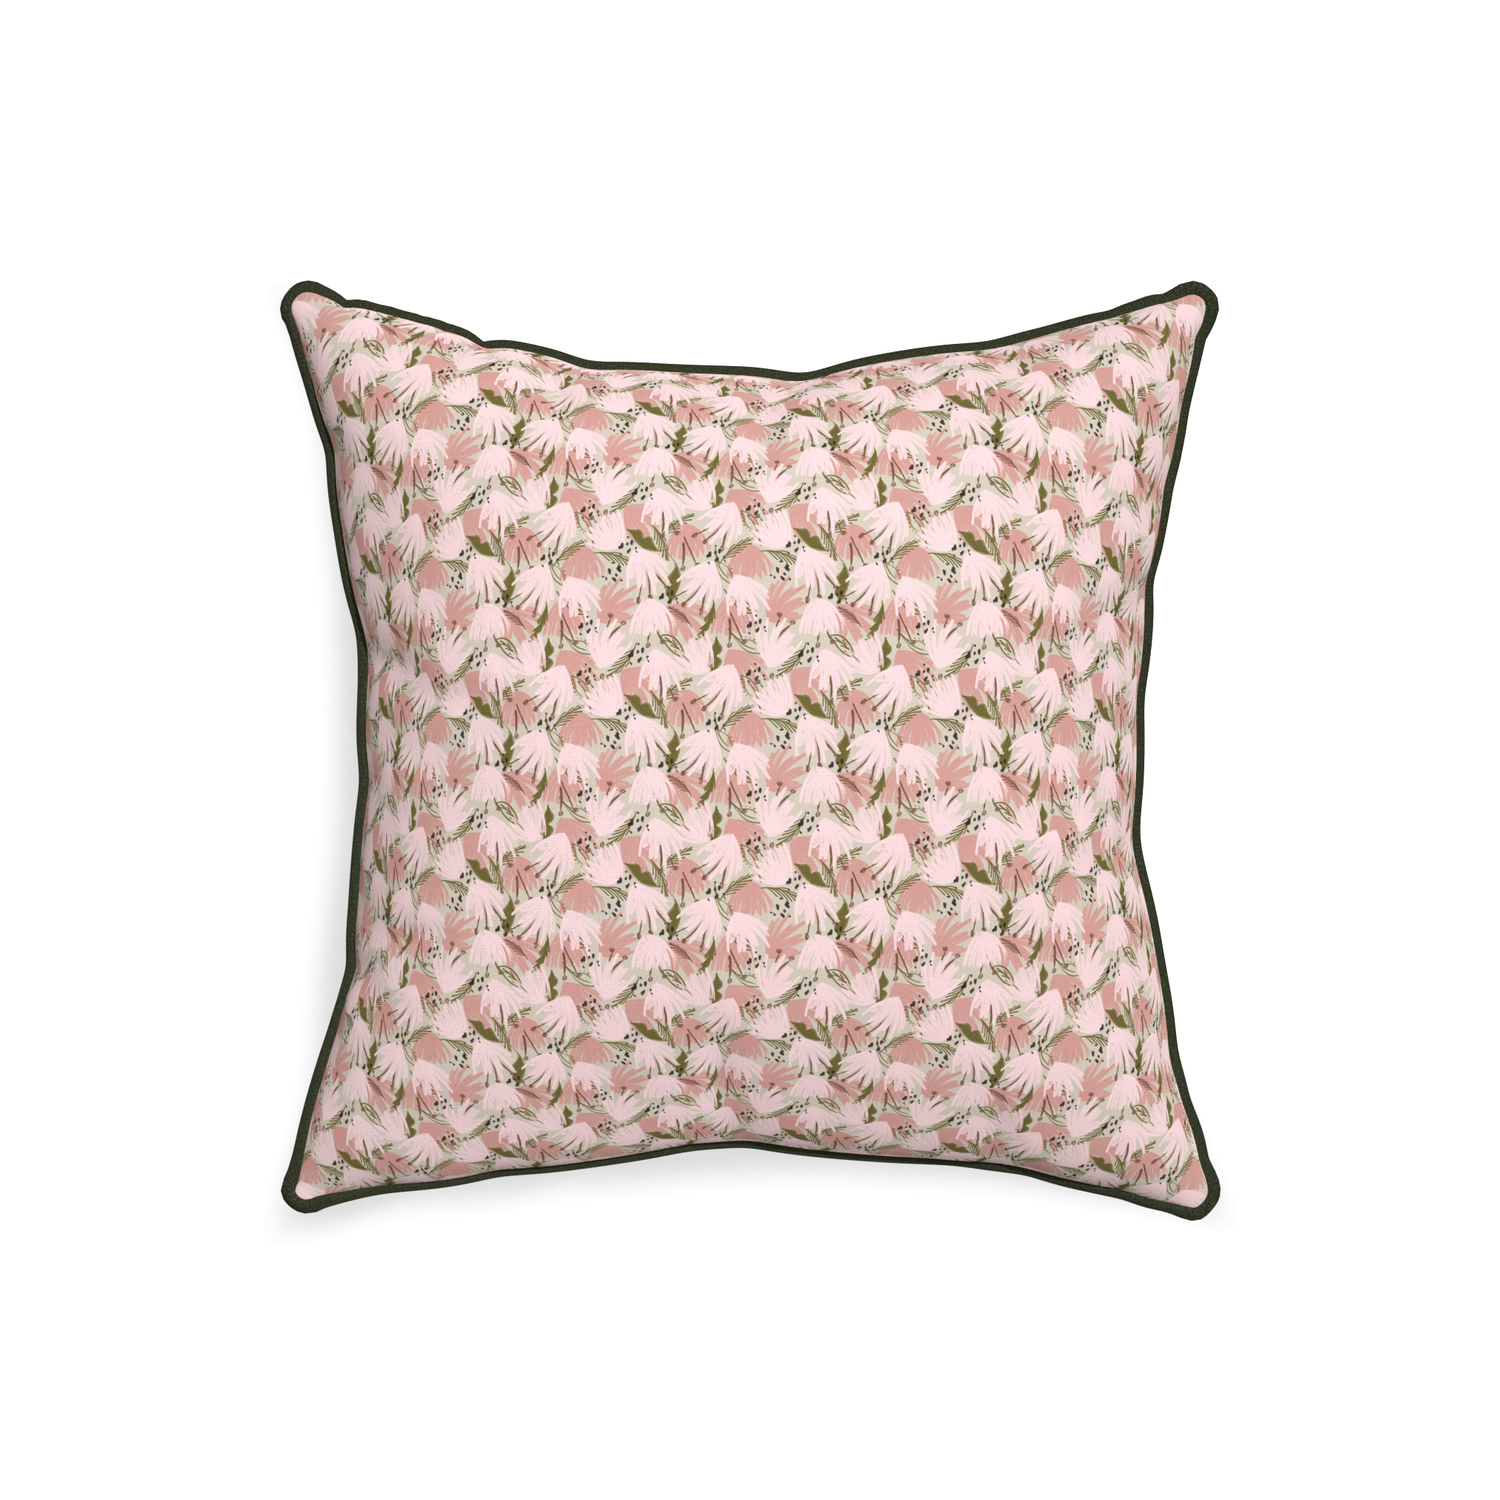 20-square eden pink custom pink floralpillow with f piping on white background